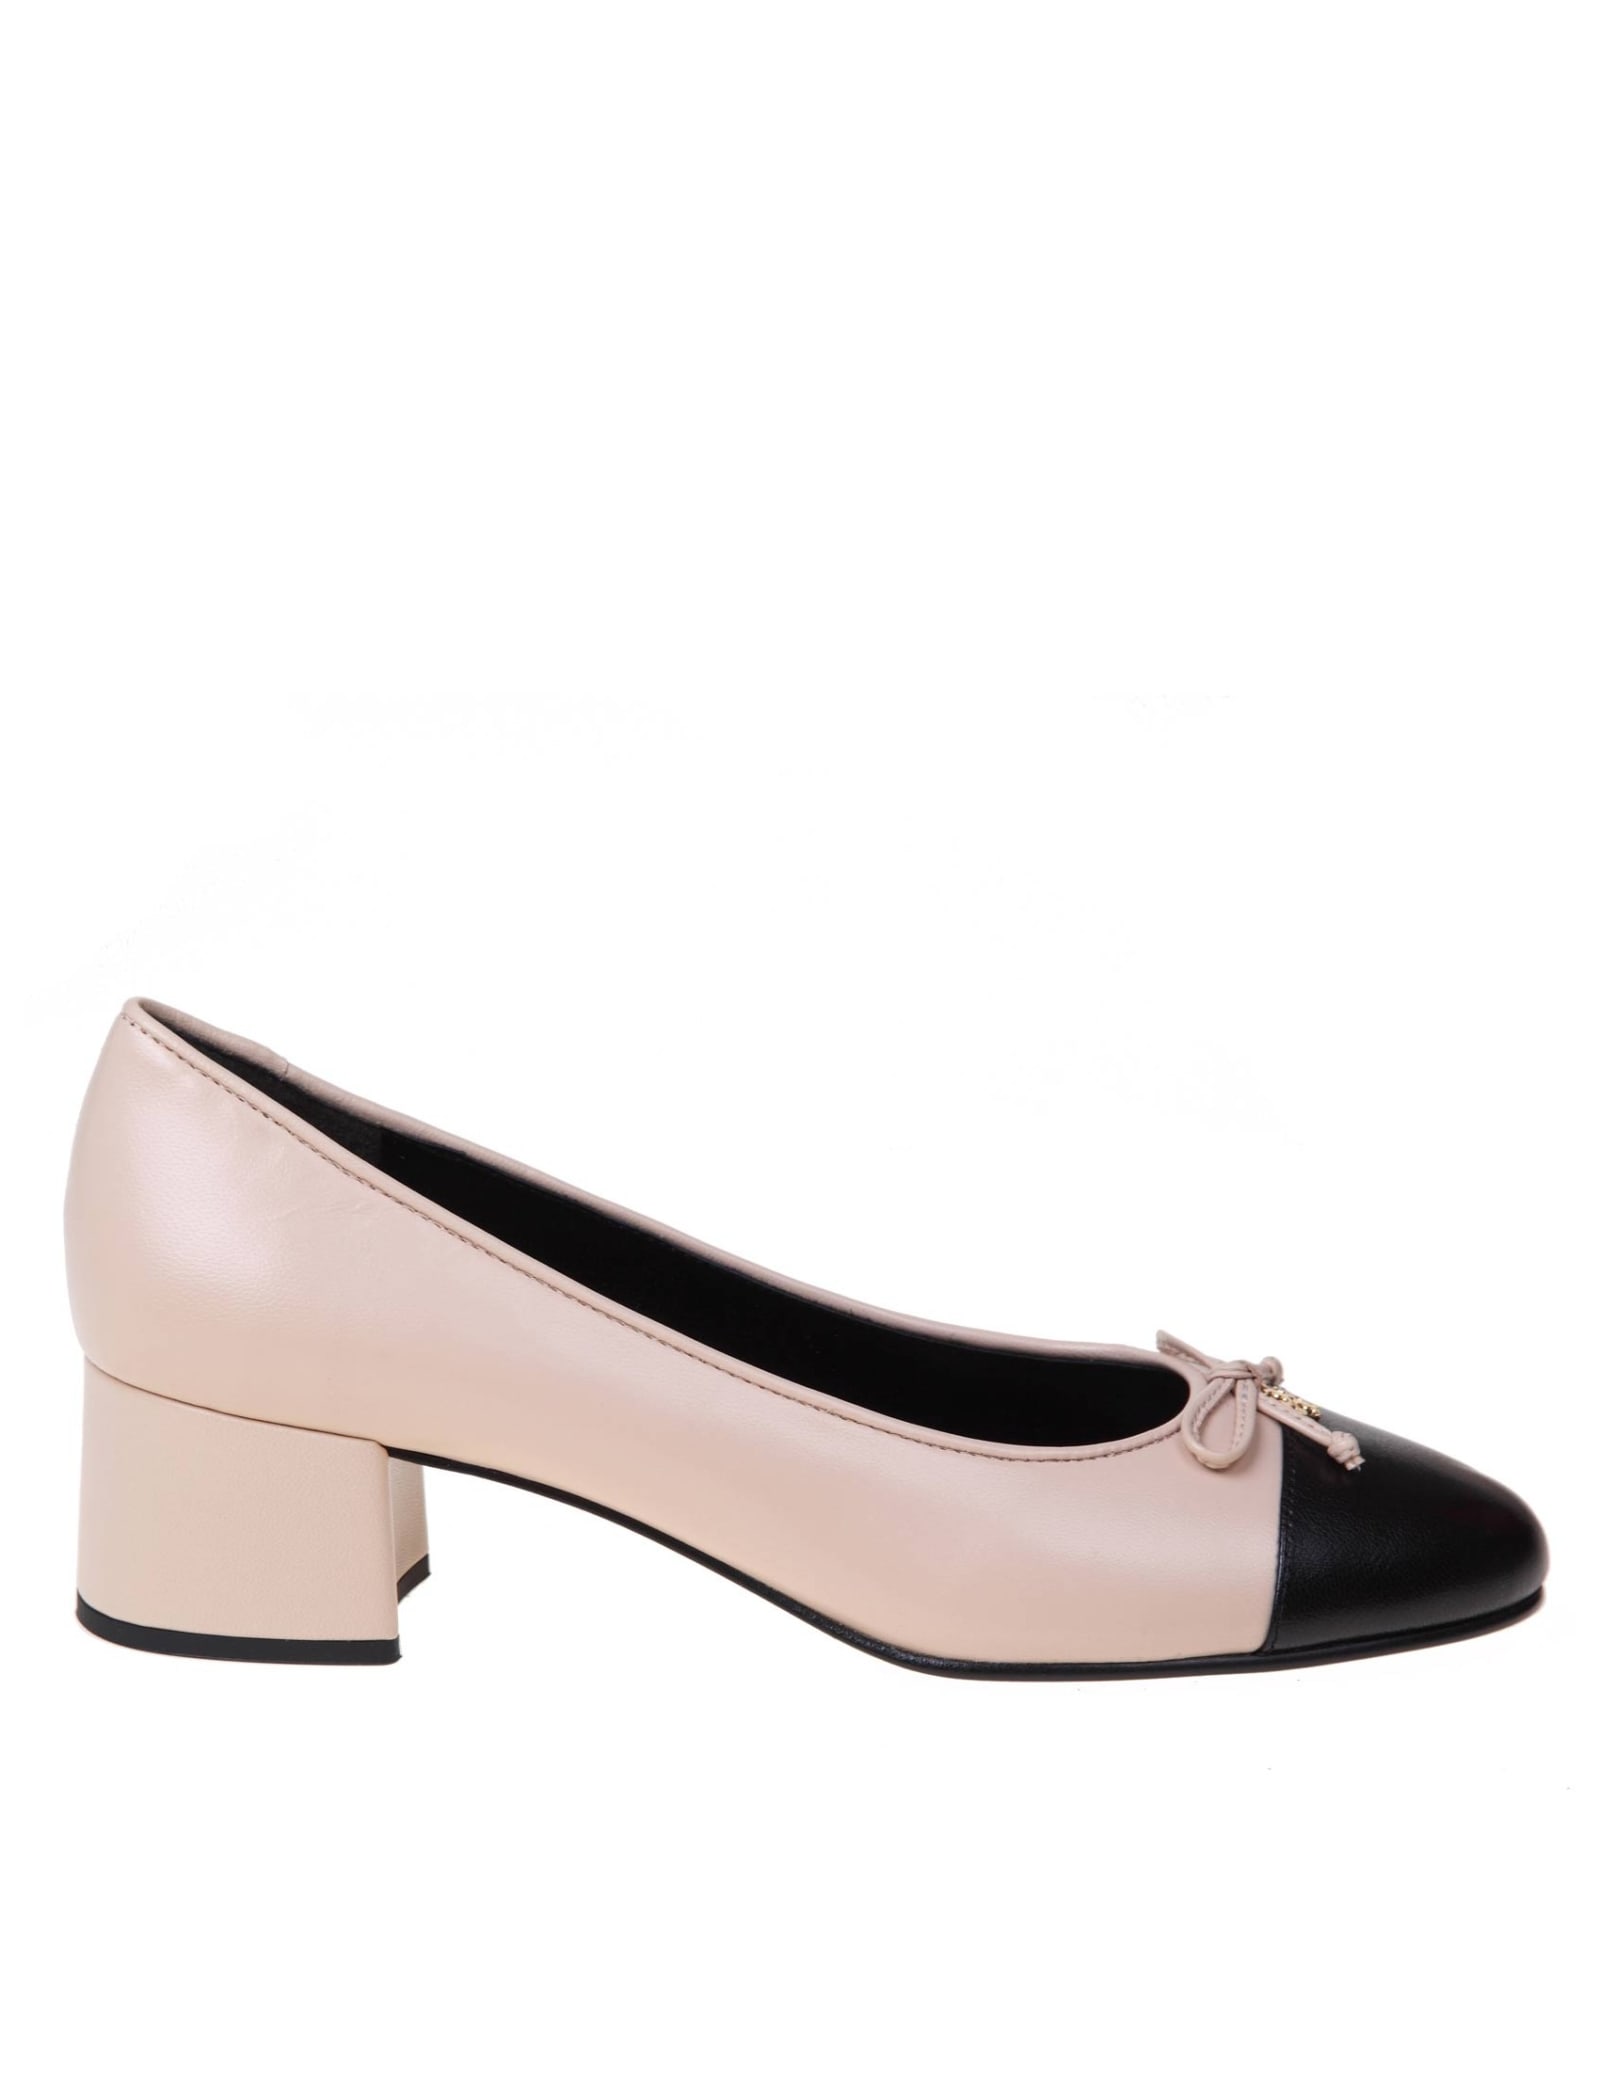 Tory Burch Pump Cap-toe In Leather With Bow In Black/rose